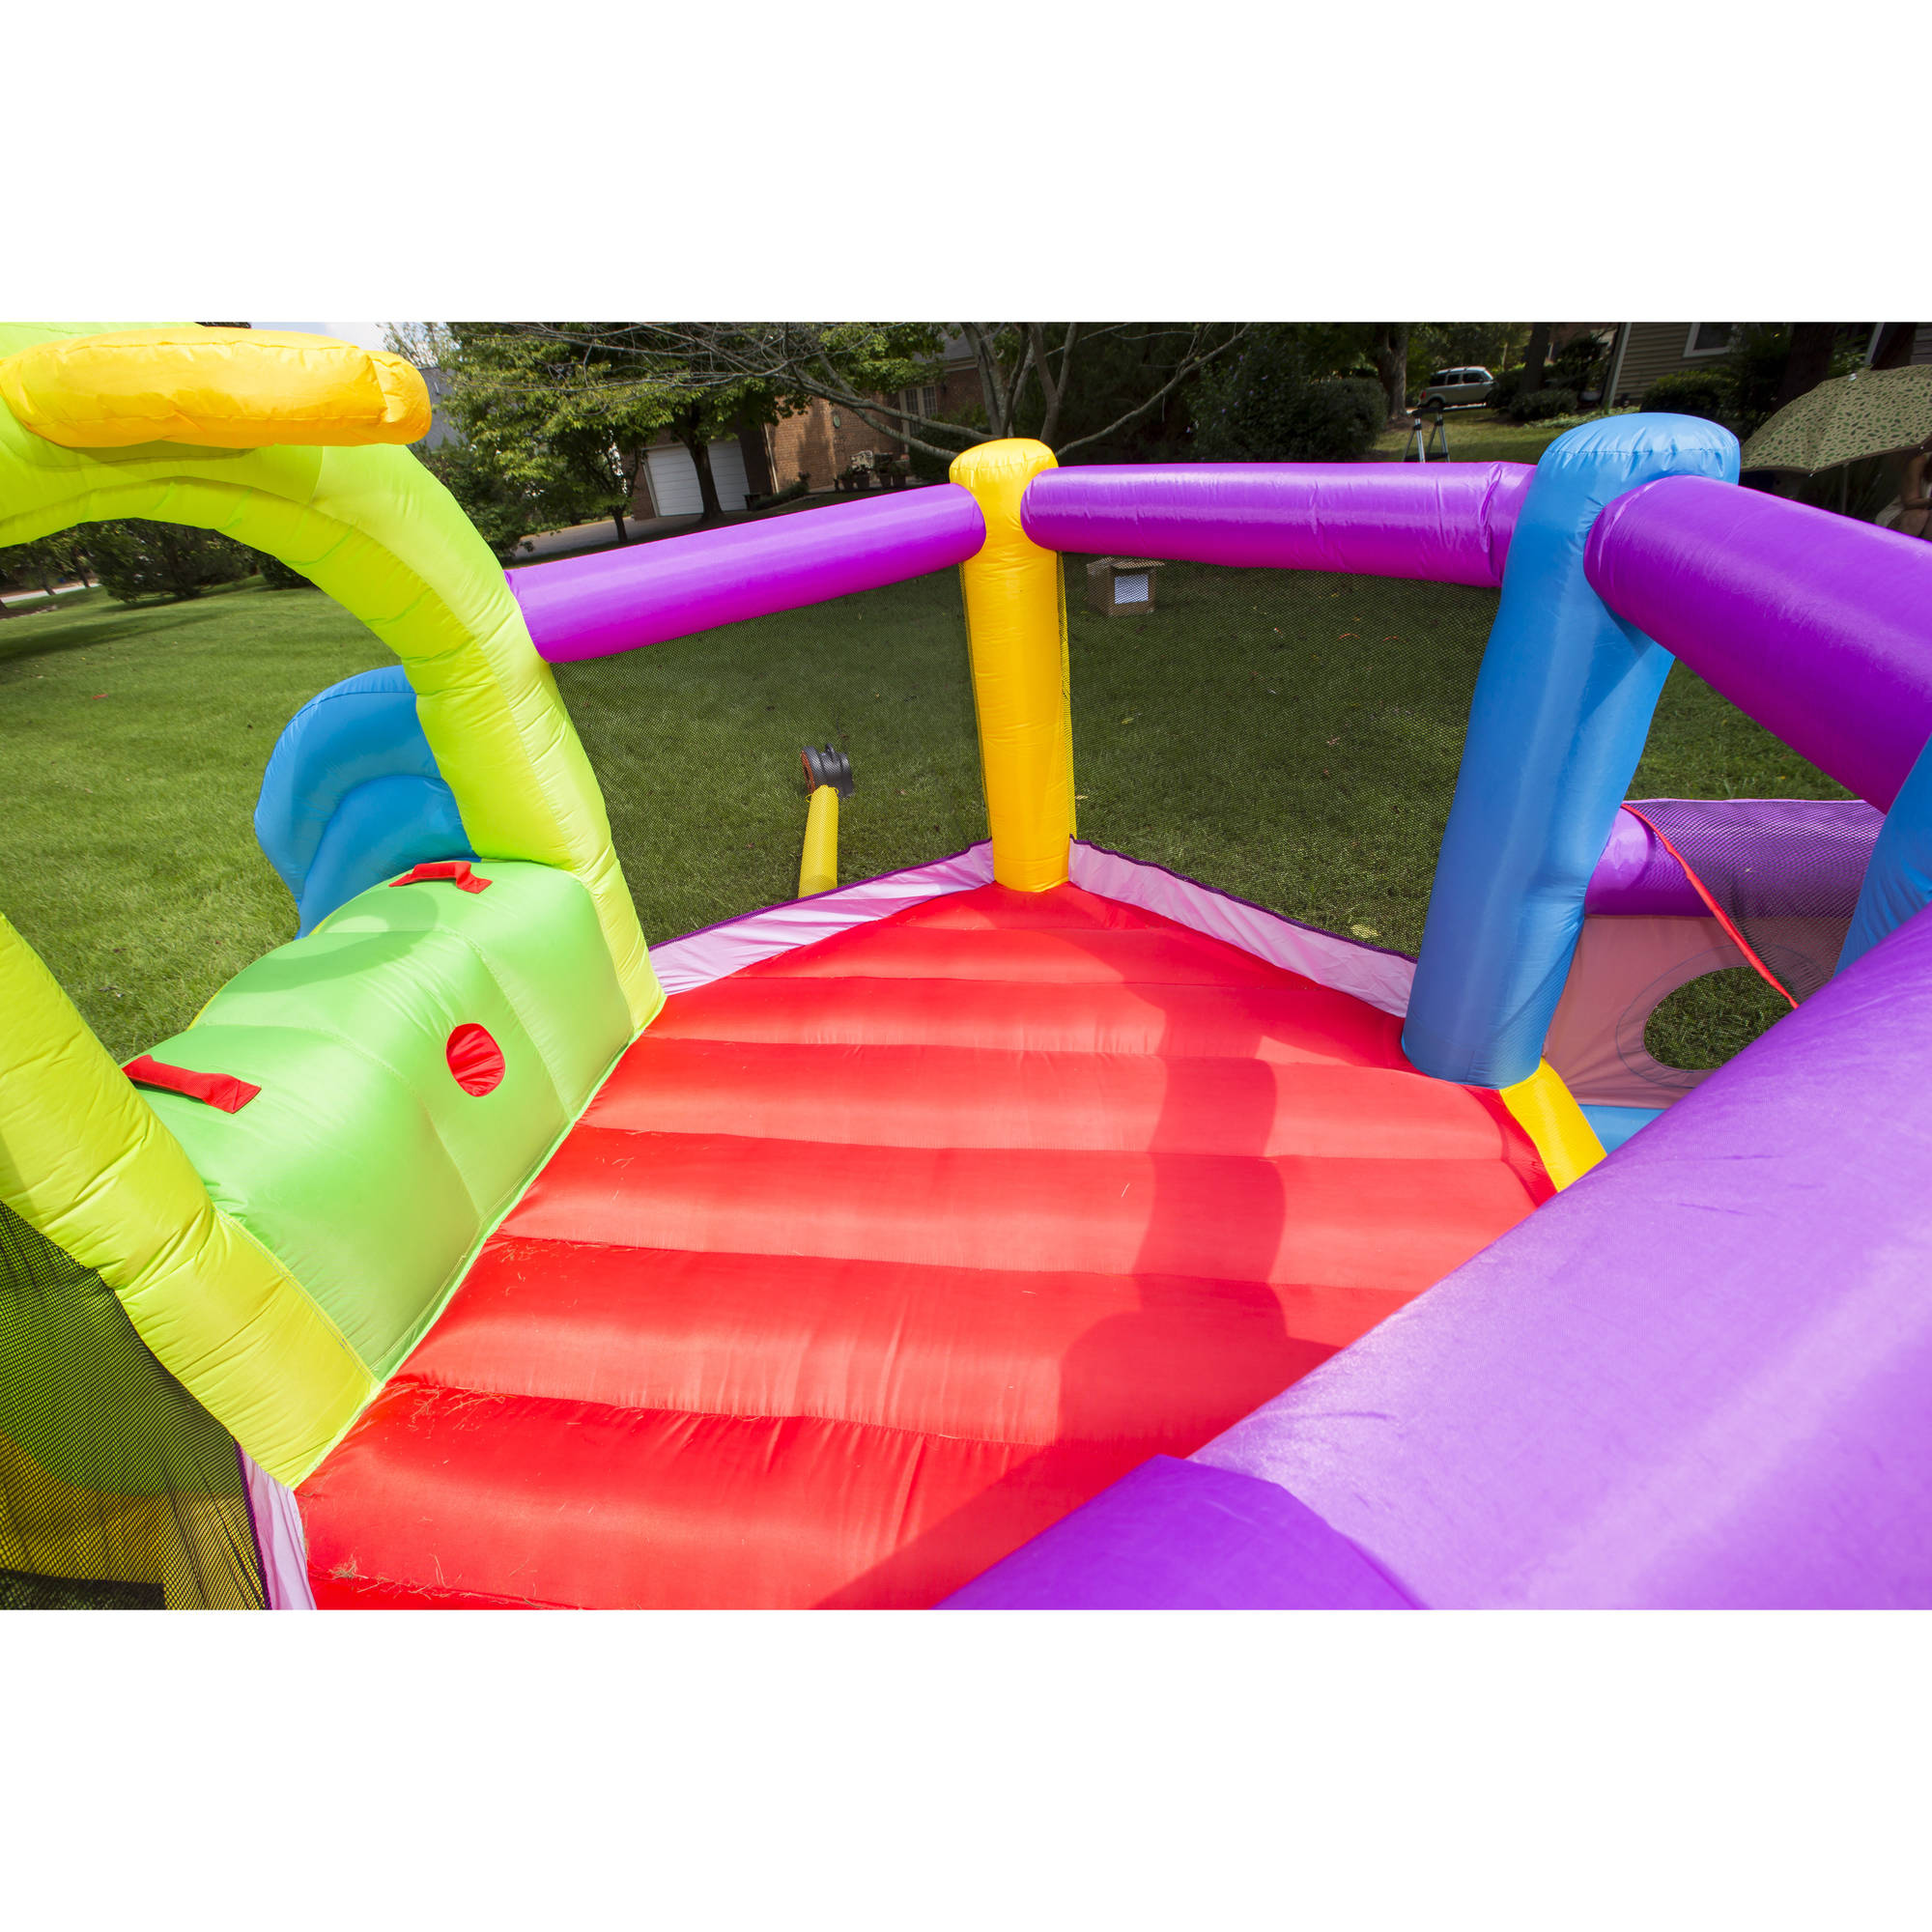 Magic Time Fort N Sport Inflatable Bounce House and Slide - image 4 of 6